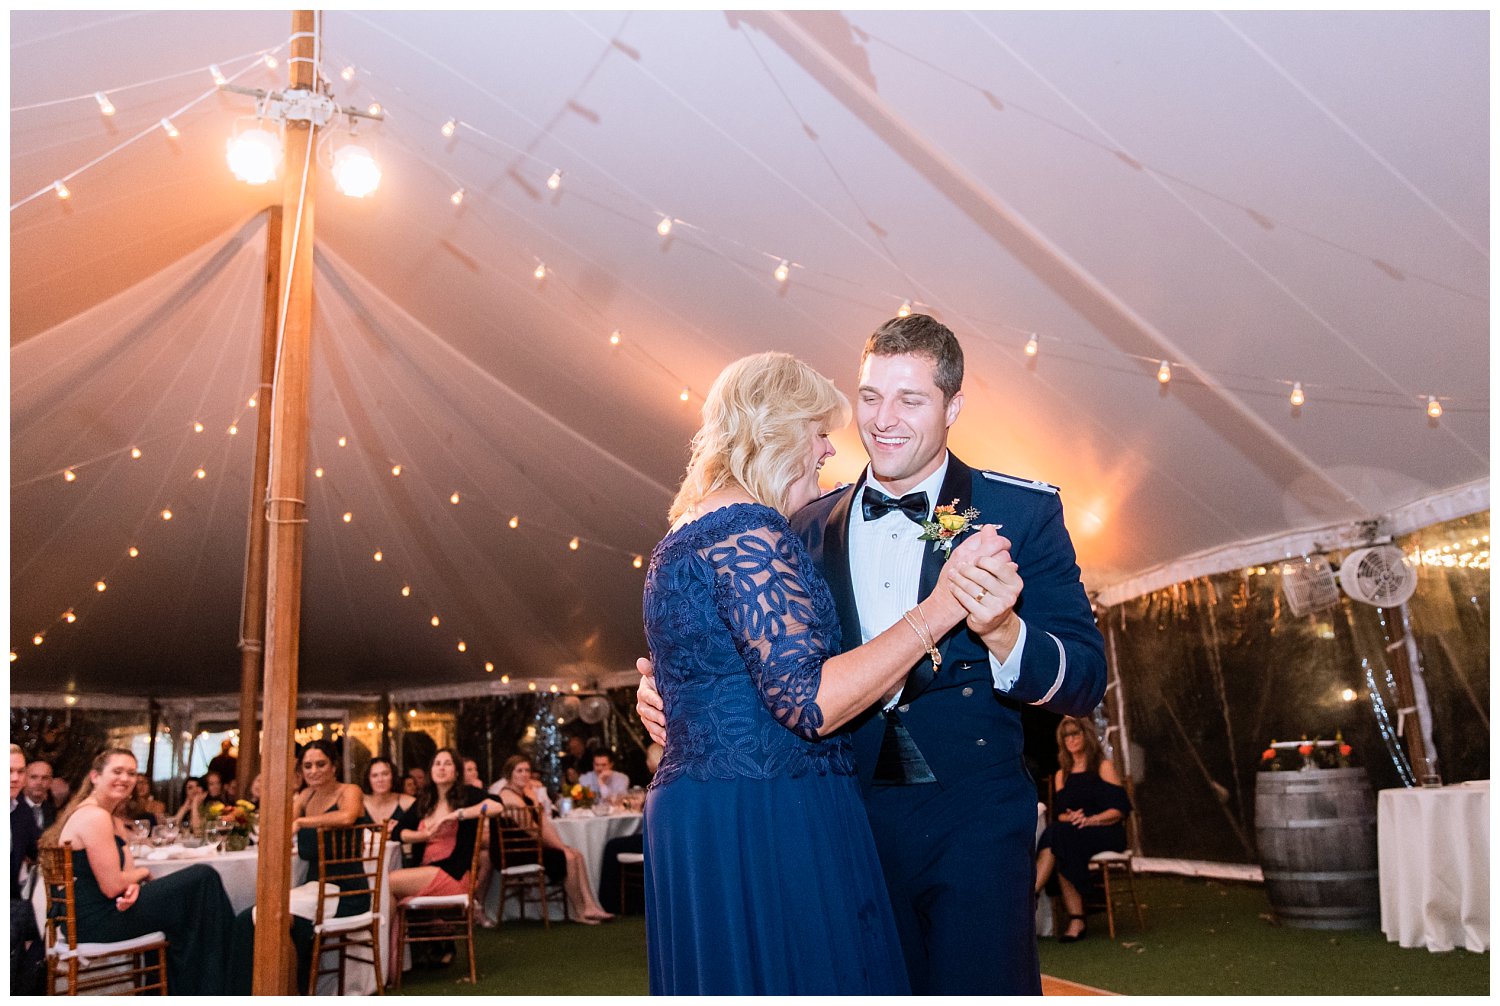 Mother son dance at Keswick Vineyard wedding photographed by Heather Dodge Photography